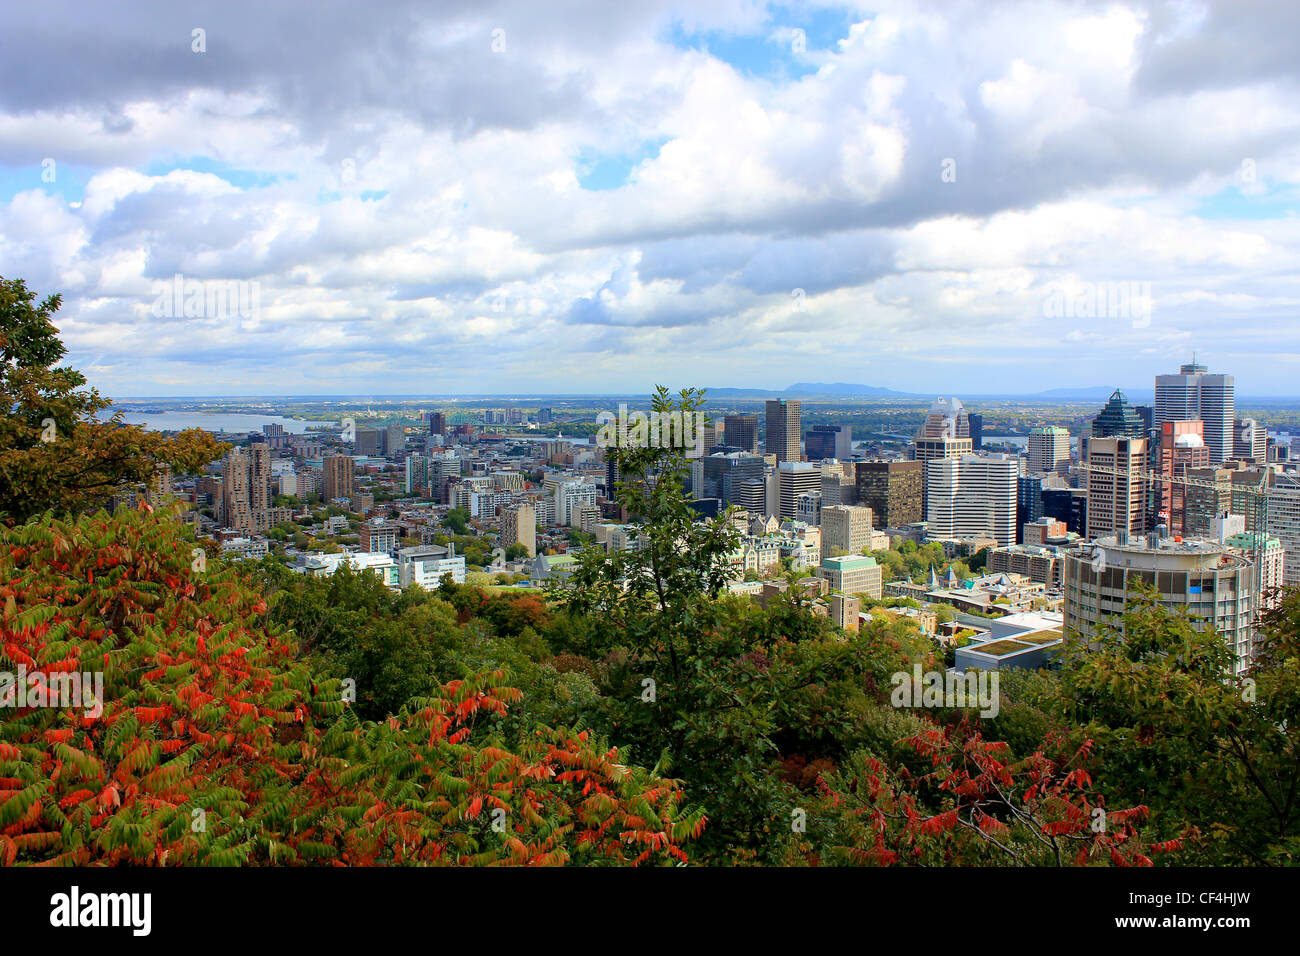 A view of Montreal, Quebec from the park at Mt Royal. Stock Photo